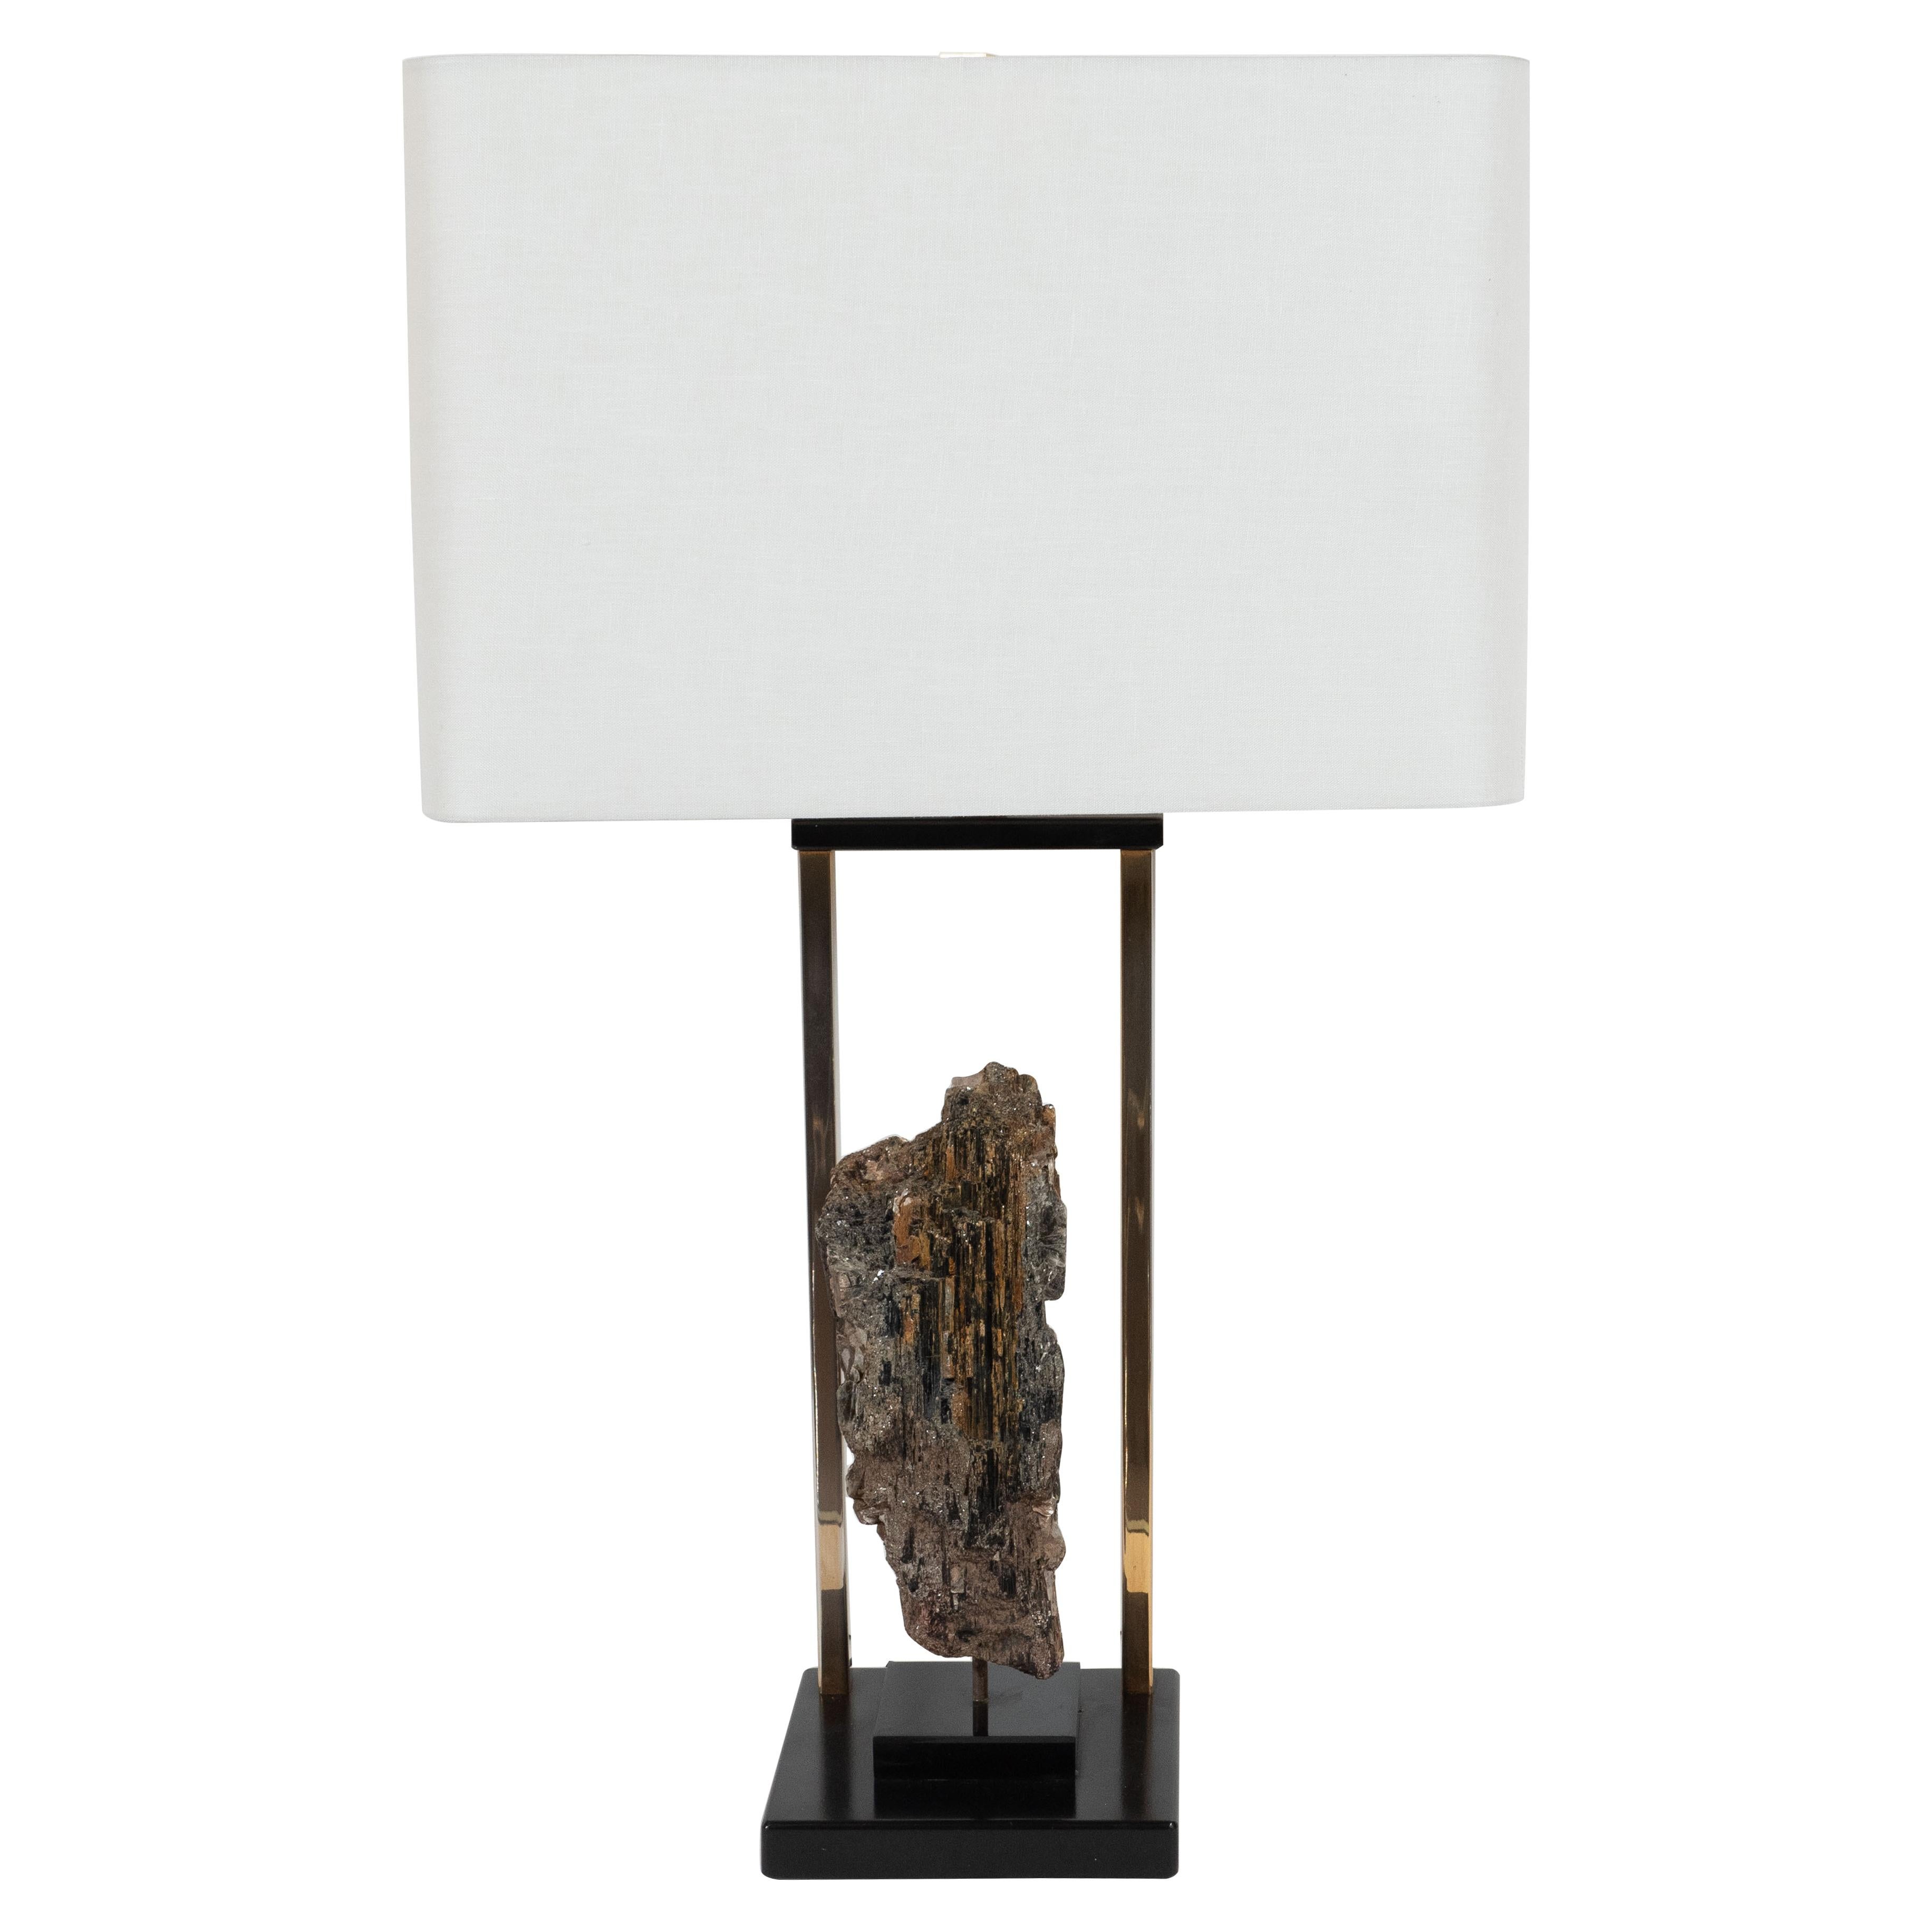 French Midcentury Organic Modern Mica, Brass, Black Enamel and Resin Table Lamp For Sale